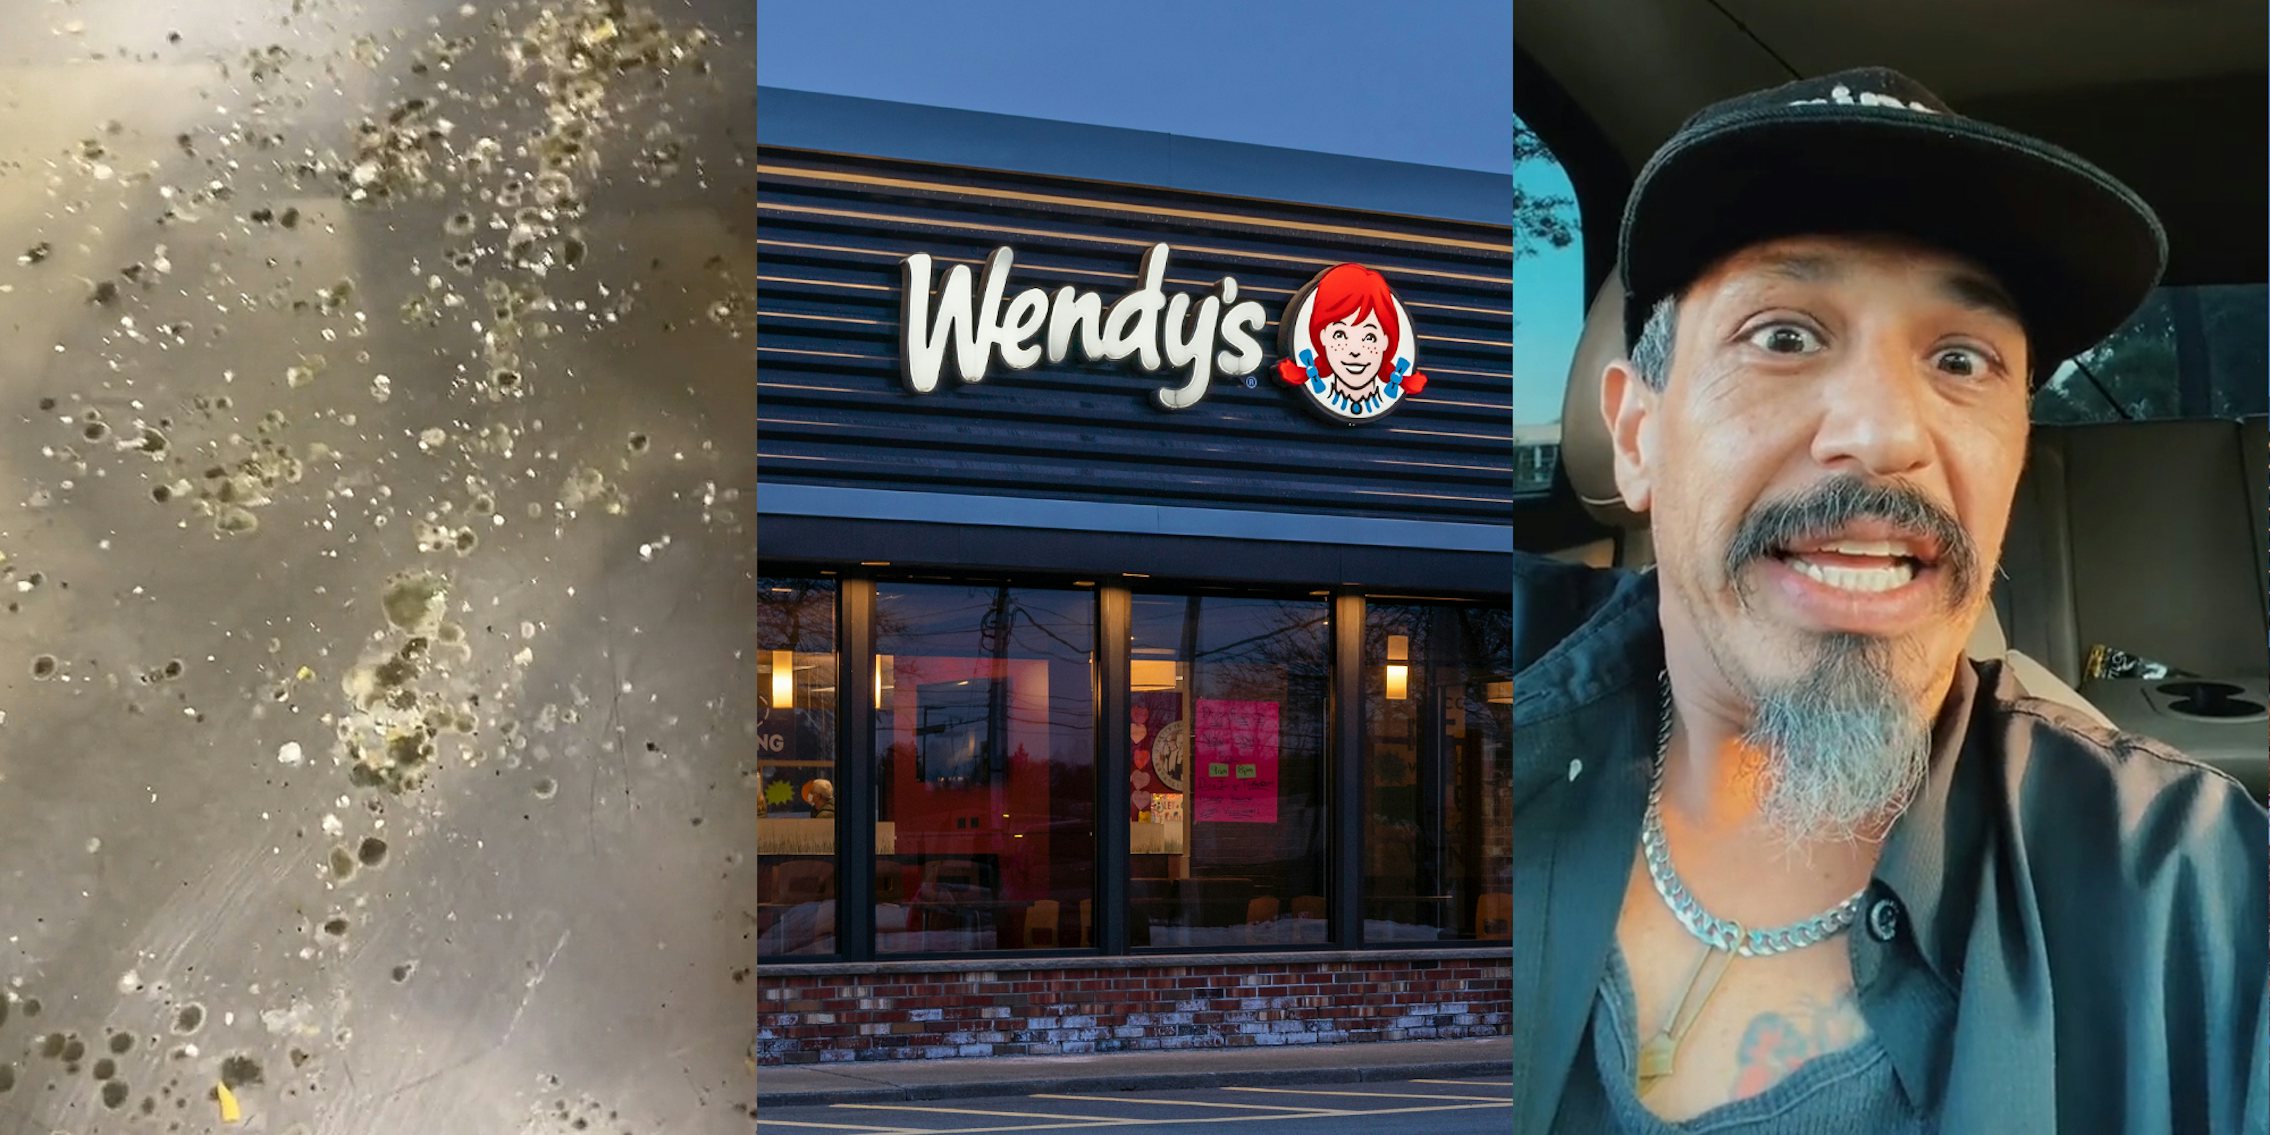 Wendy's cooktop coated in mold (l) Wendy's restaurant with sign (c) man speaking in car (r)